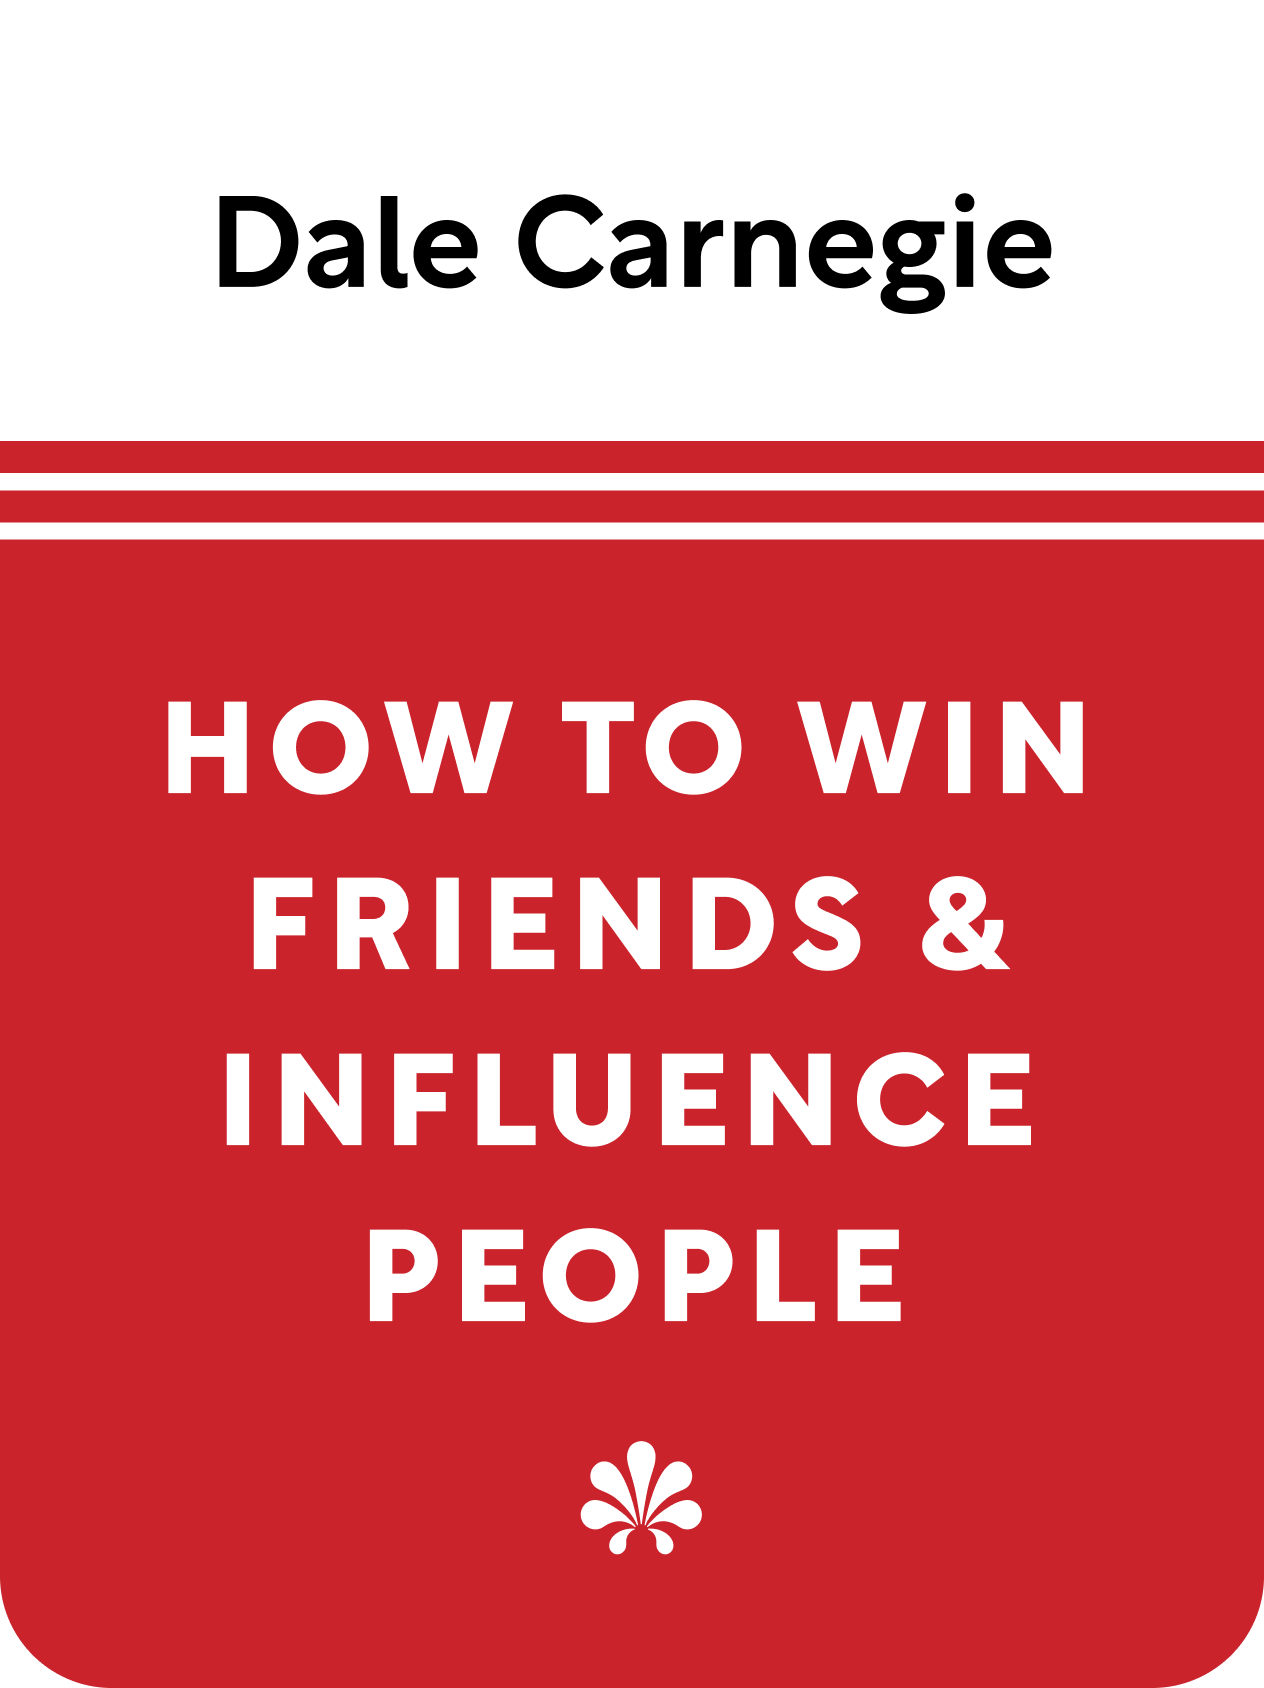 How to Win Friends and Influence People by Dale Carnegie: Book Summary